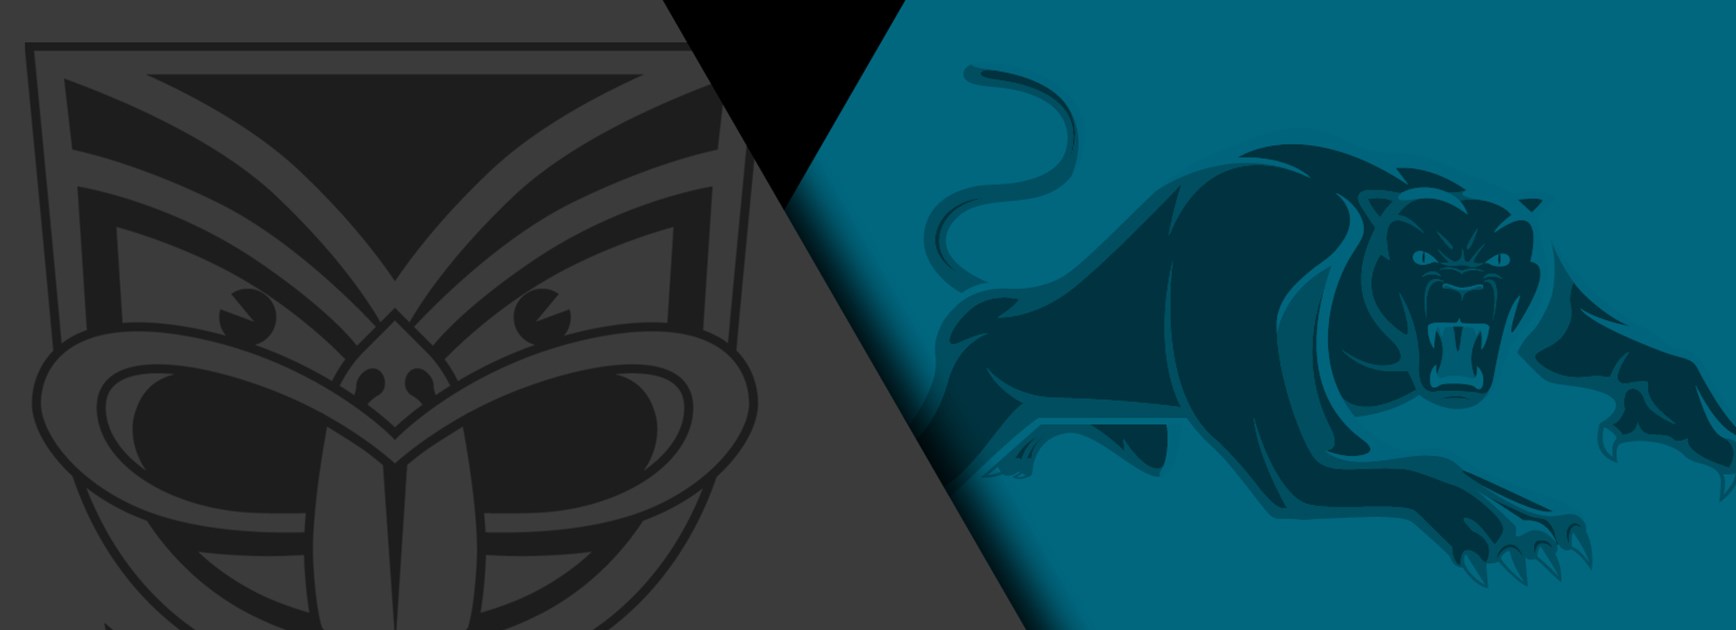 Warriors-Panthers preview.